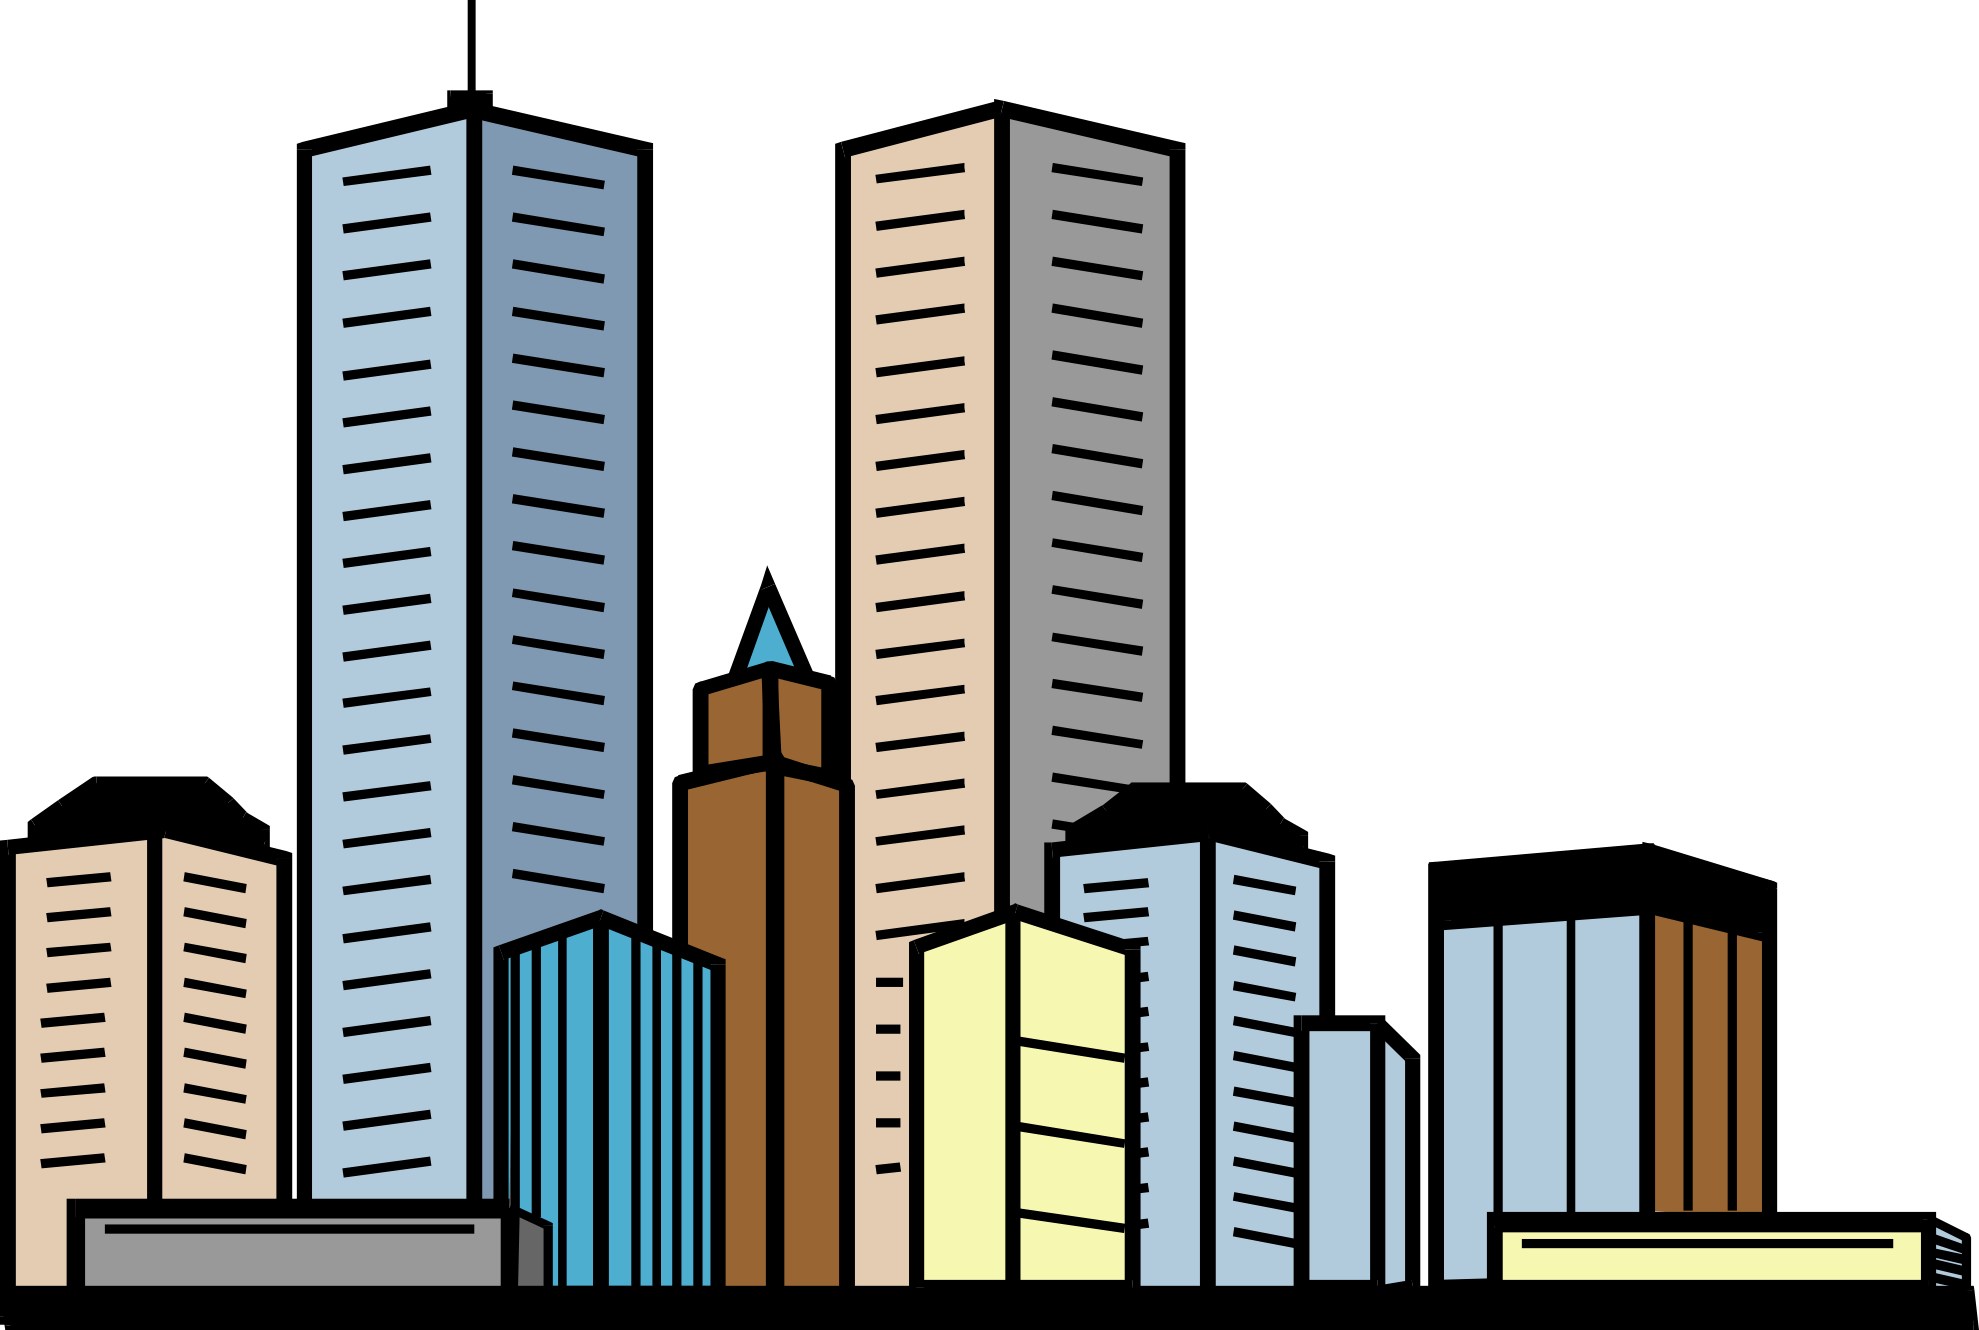 city clipart tall building